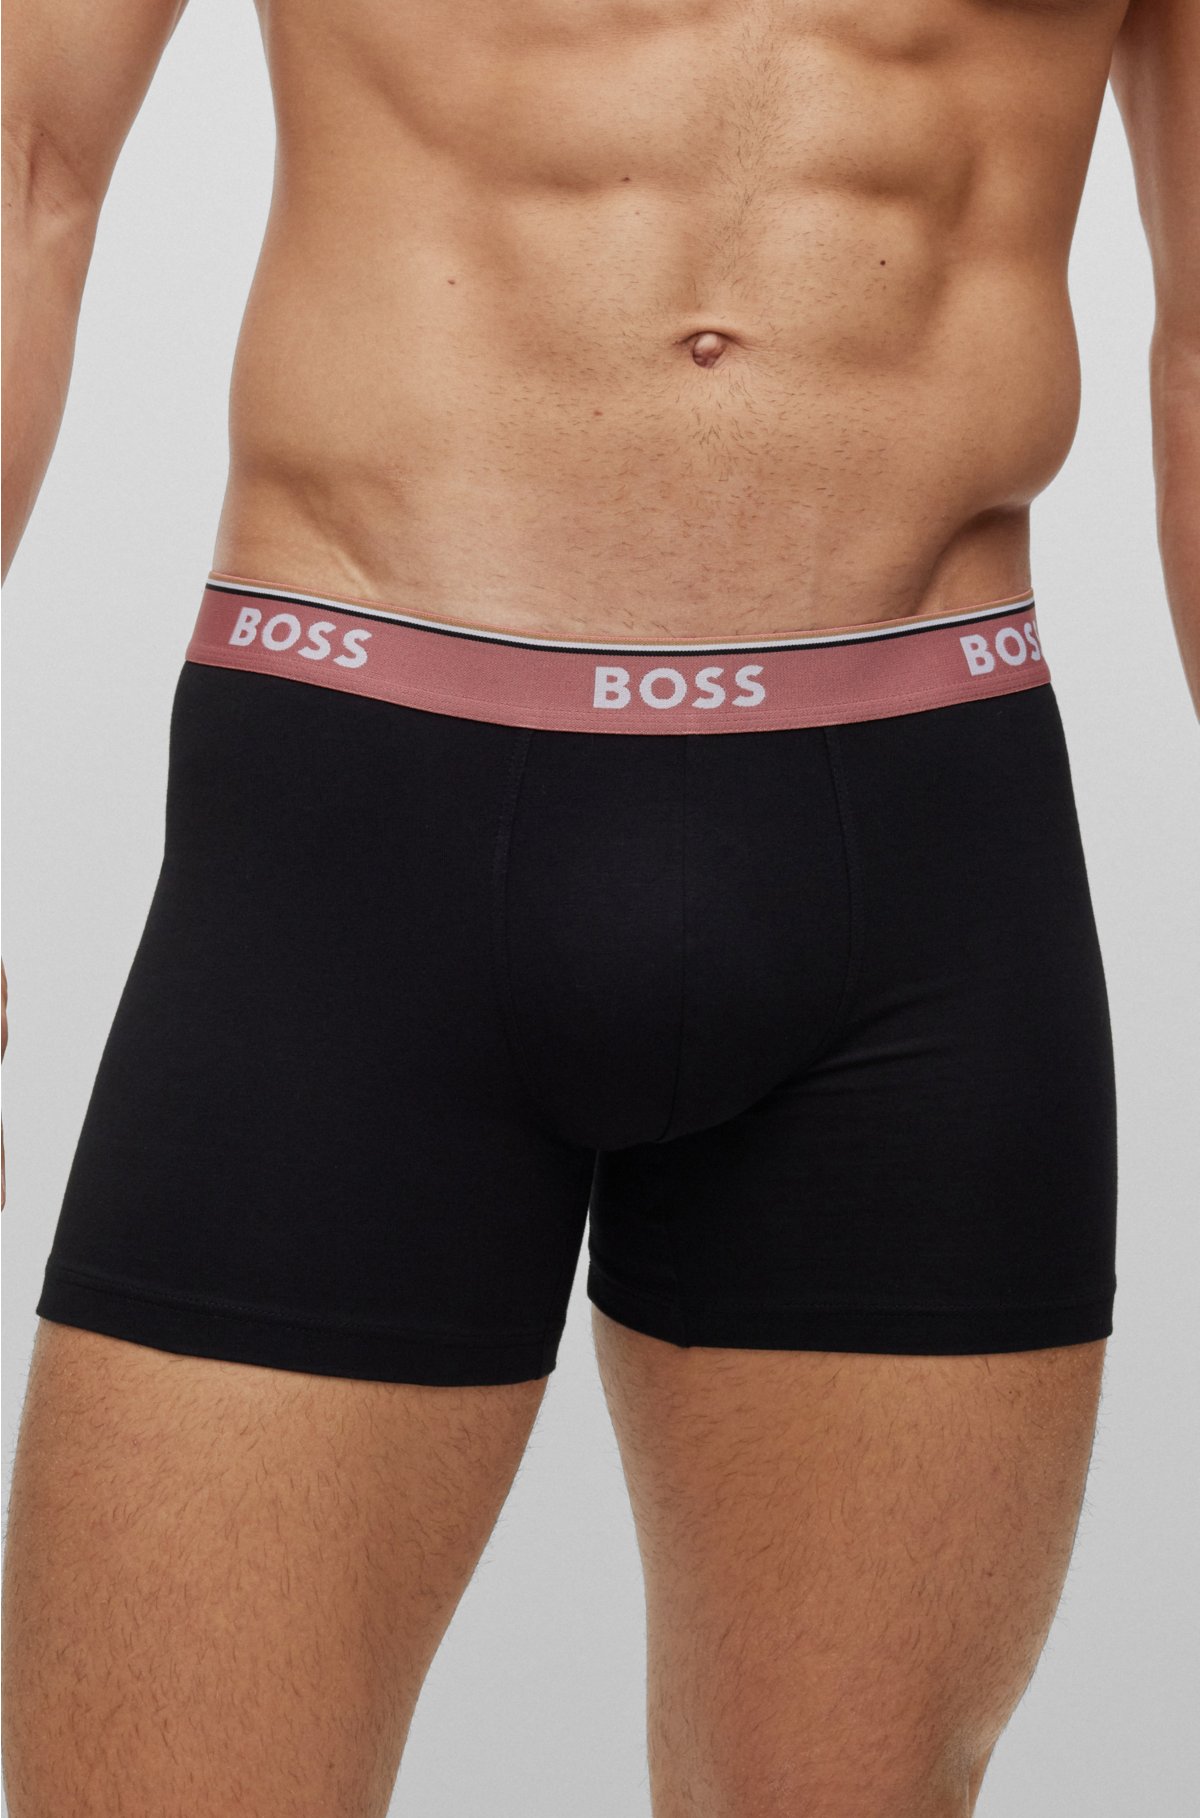 Three-pack of waistbands - logo BOSS with briefs boxer